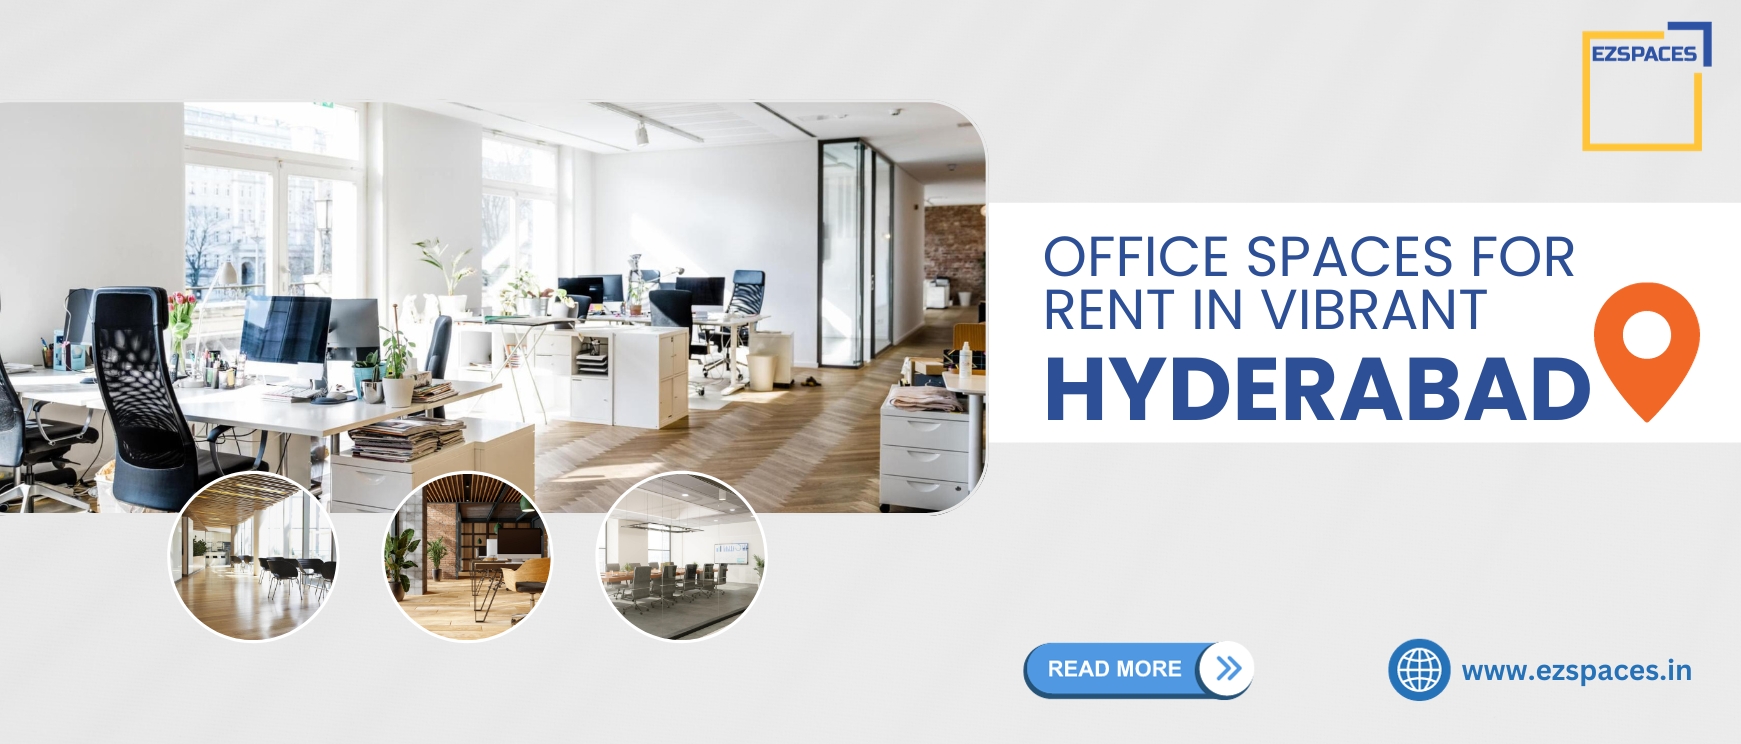 Office Spaces for Rent in Vibrant Hyderabad